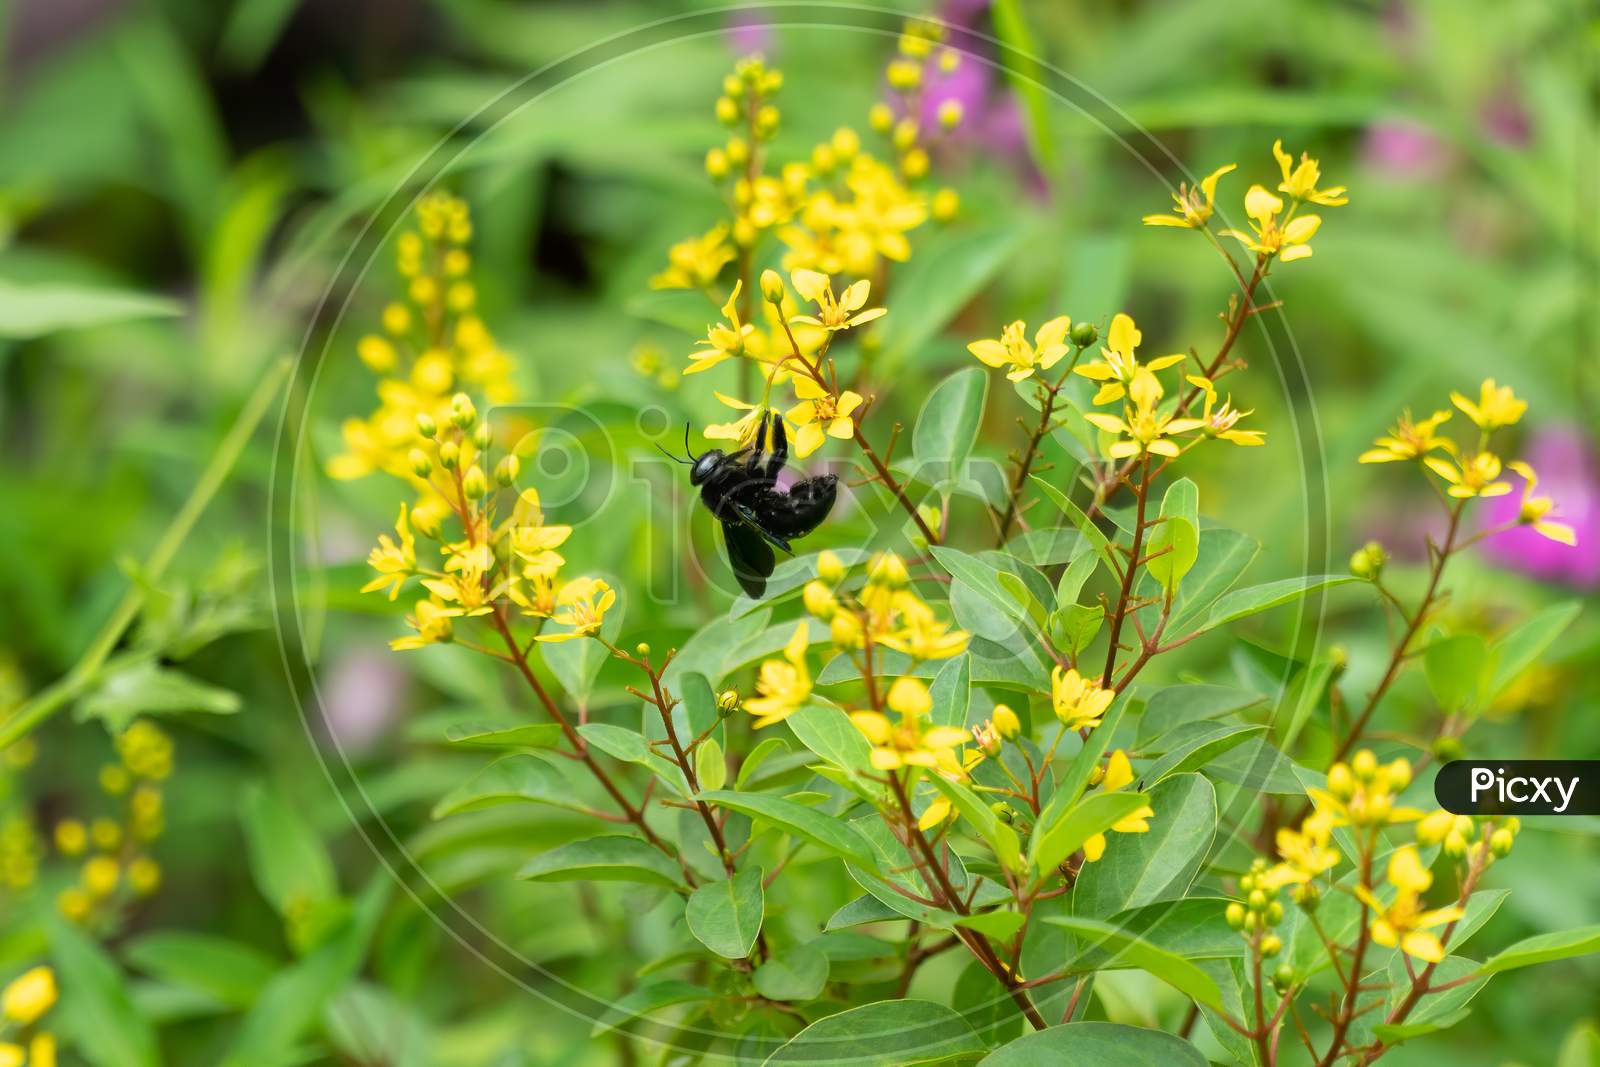 Carpenter Bee Feeding On Nectar From The Flowers